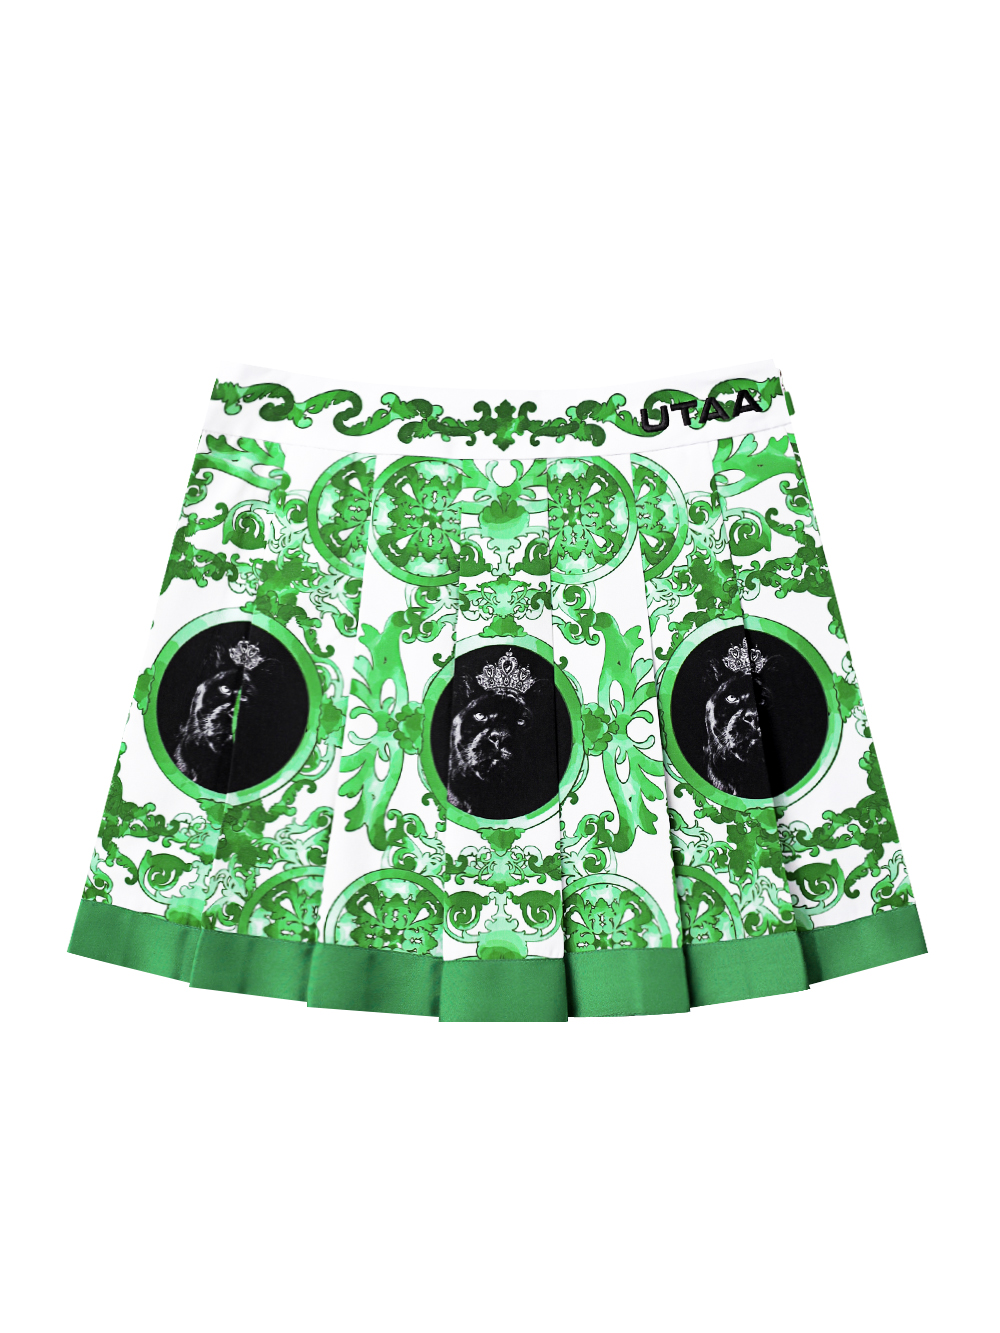 UTAA Sequence Baroque Graphic Pleats Skirt : Green (UD2SKF495GN)